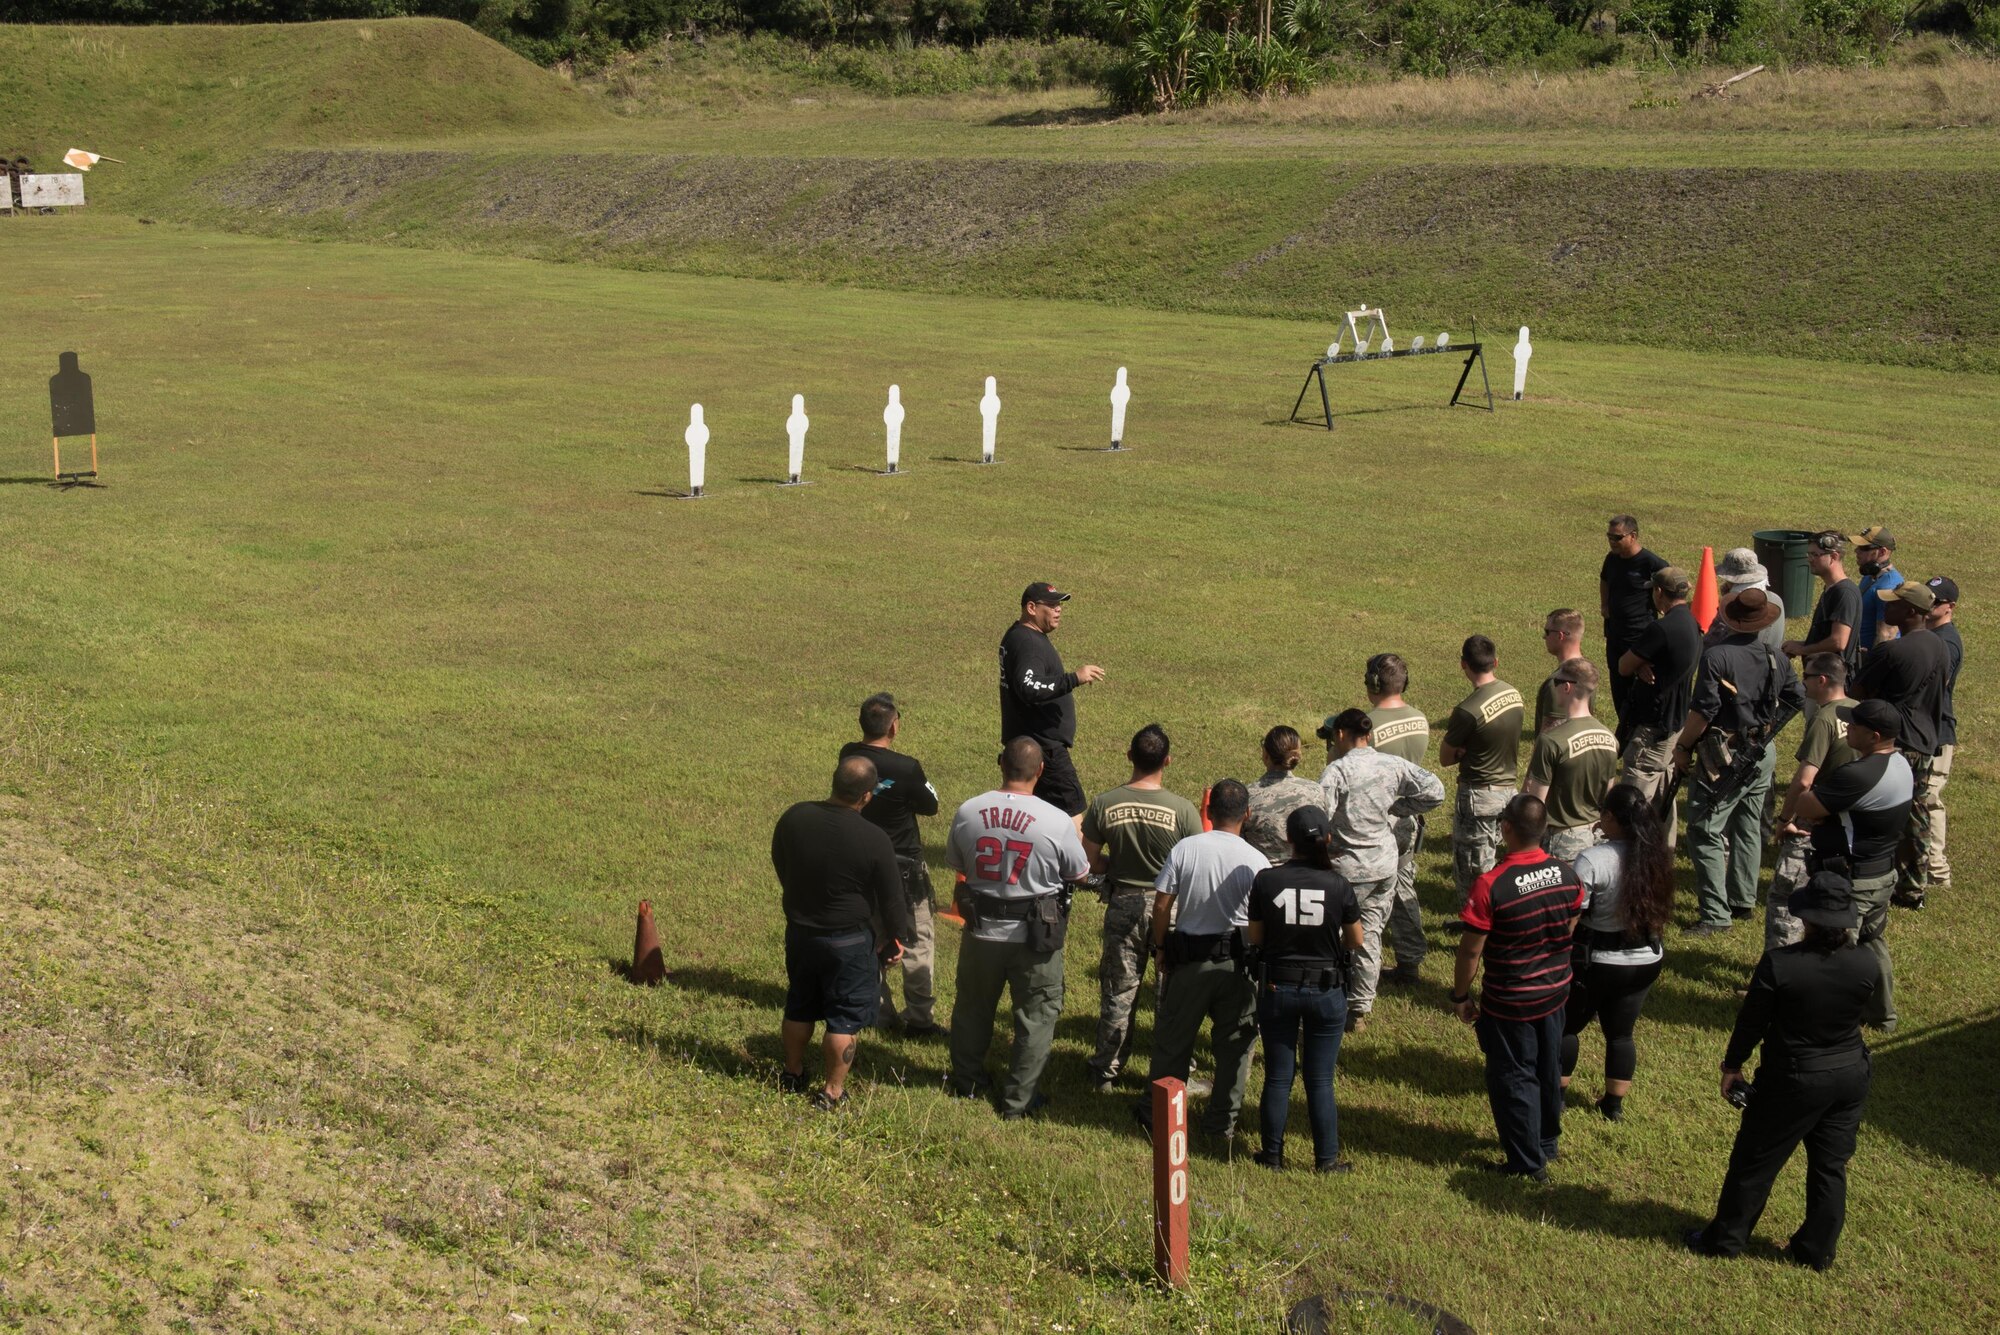 Silvano Uribe, Guam Police Department armorer, briefs shoot-off participants about range procedures April 29, 2017, at Naval Computer and Telecommunications Station, Guam. During each heat, participants flowed from the rifle, shotgun and pistol stages with the goal of hitting as many targets as possible in the shortest amount of time. (U.S. Air Force photo by Airman 1st Class Jacob Skovo)